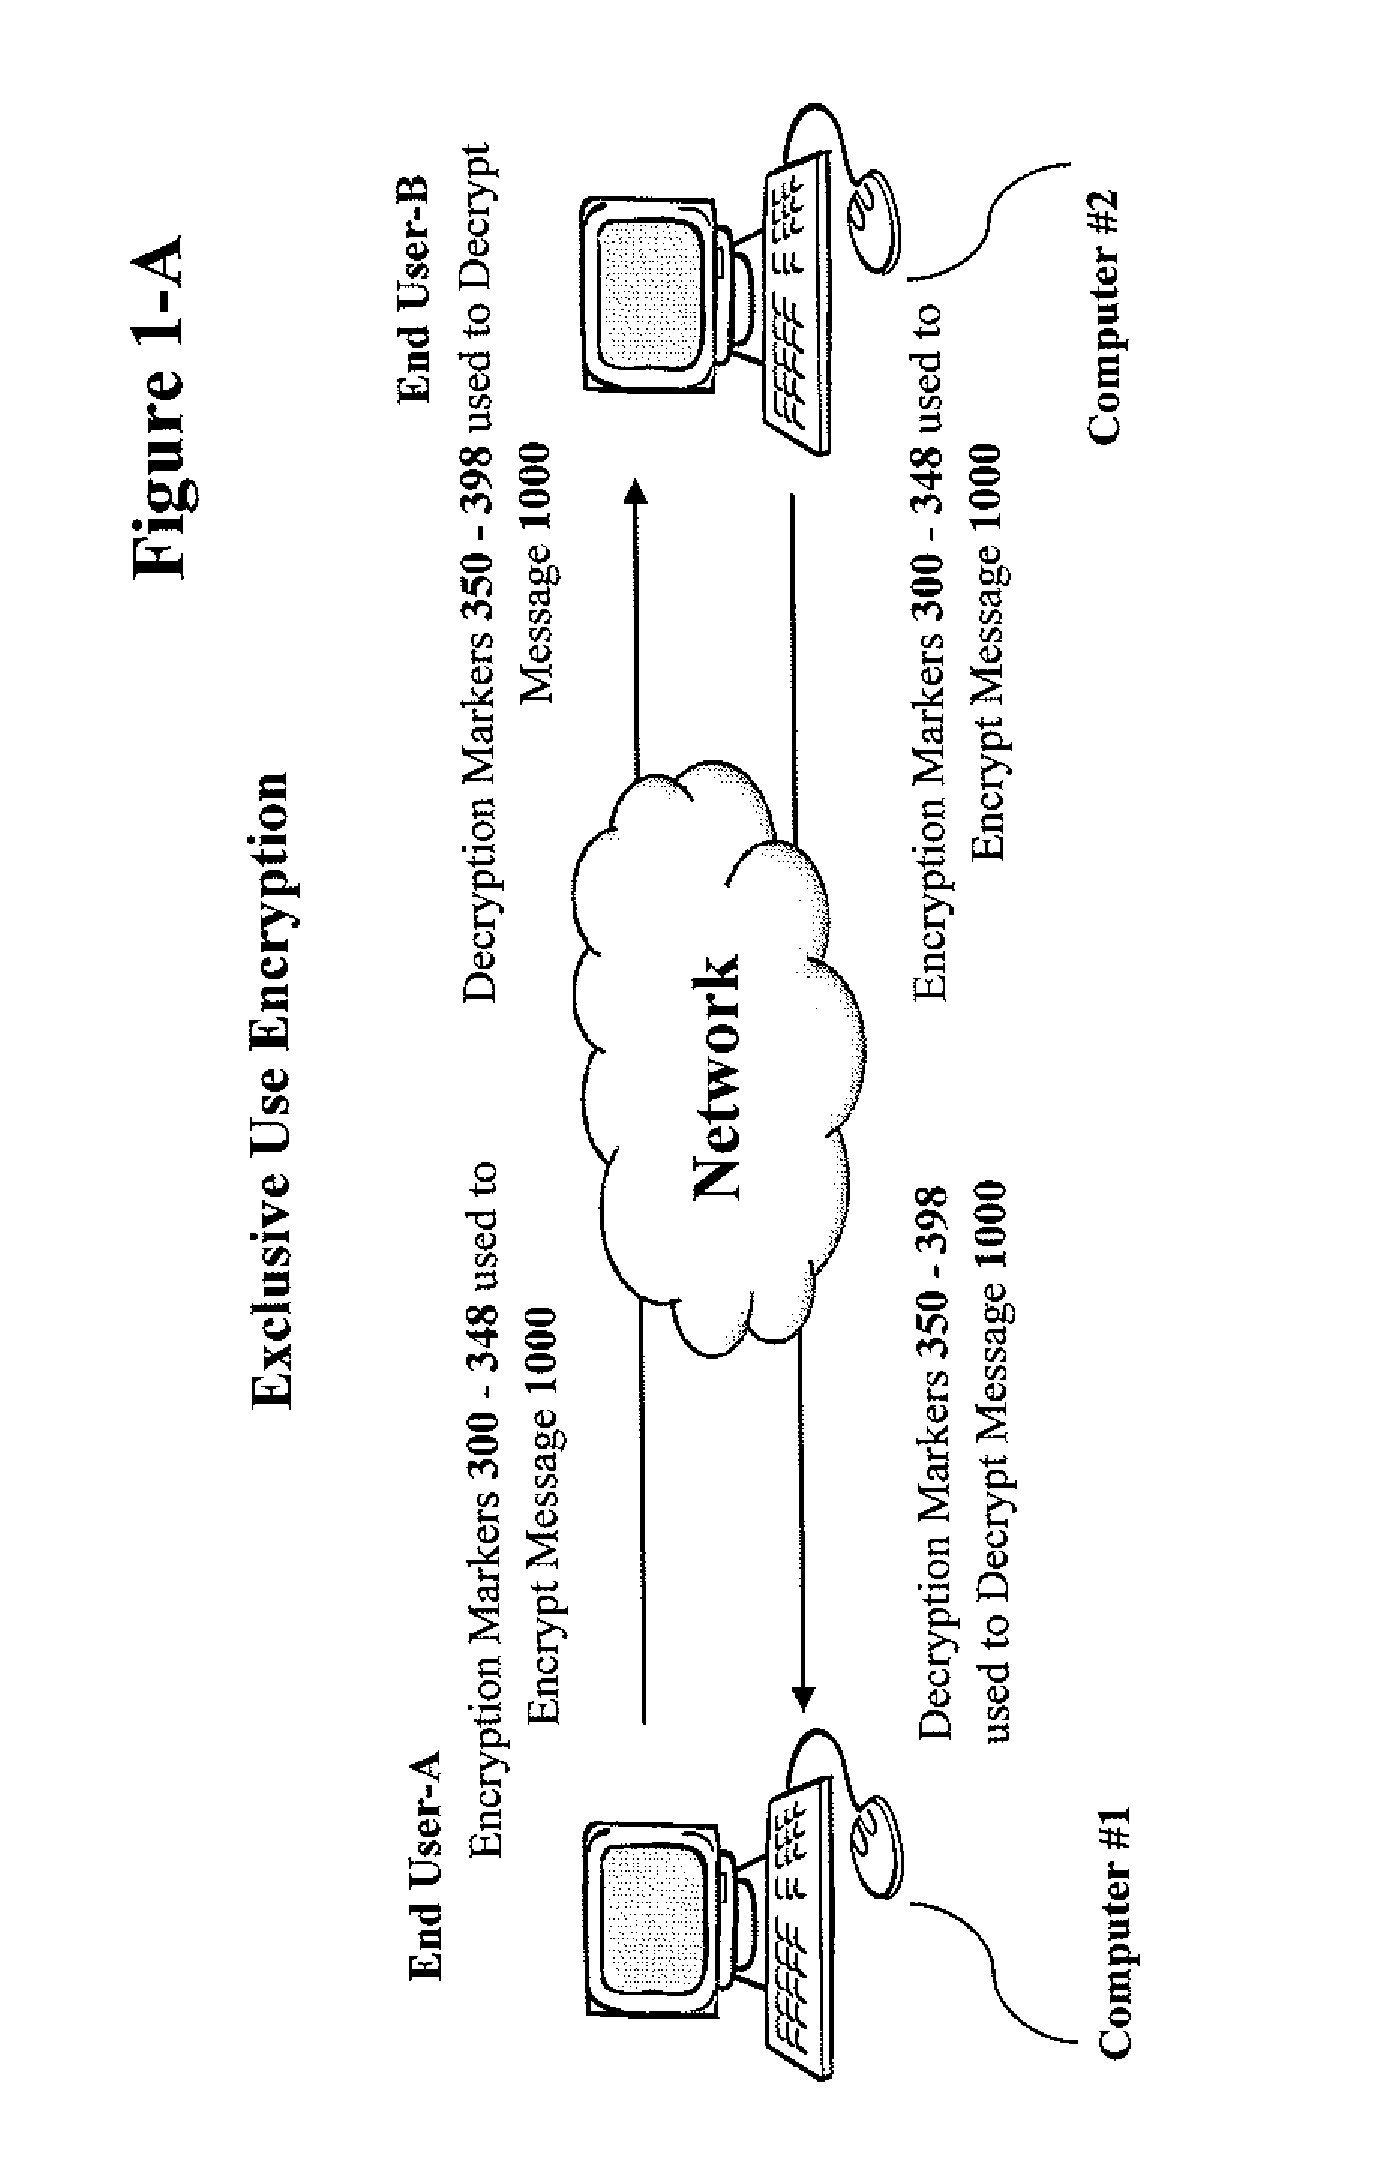 System and method for data encryption